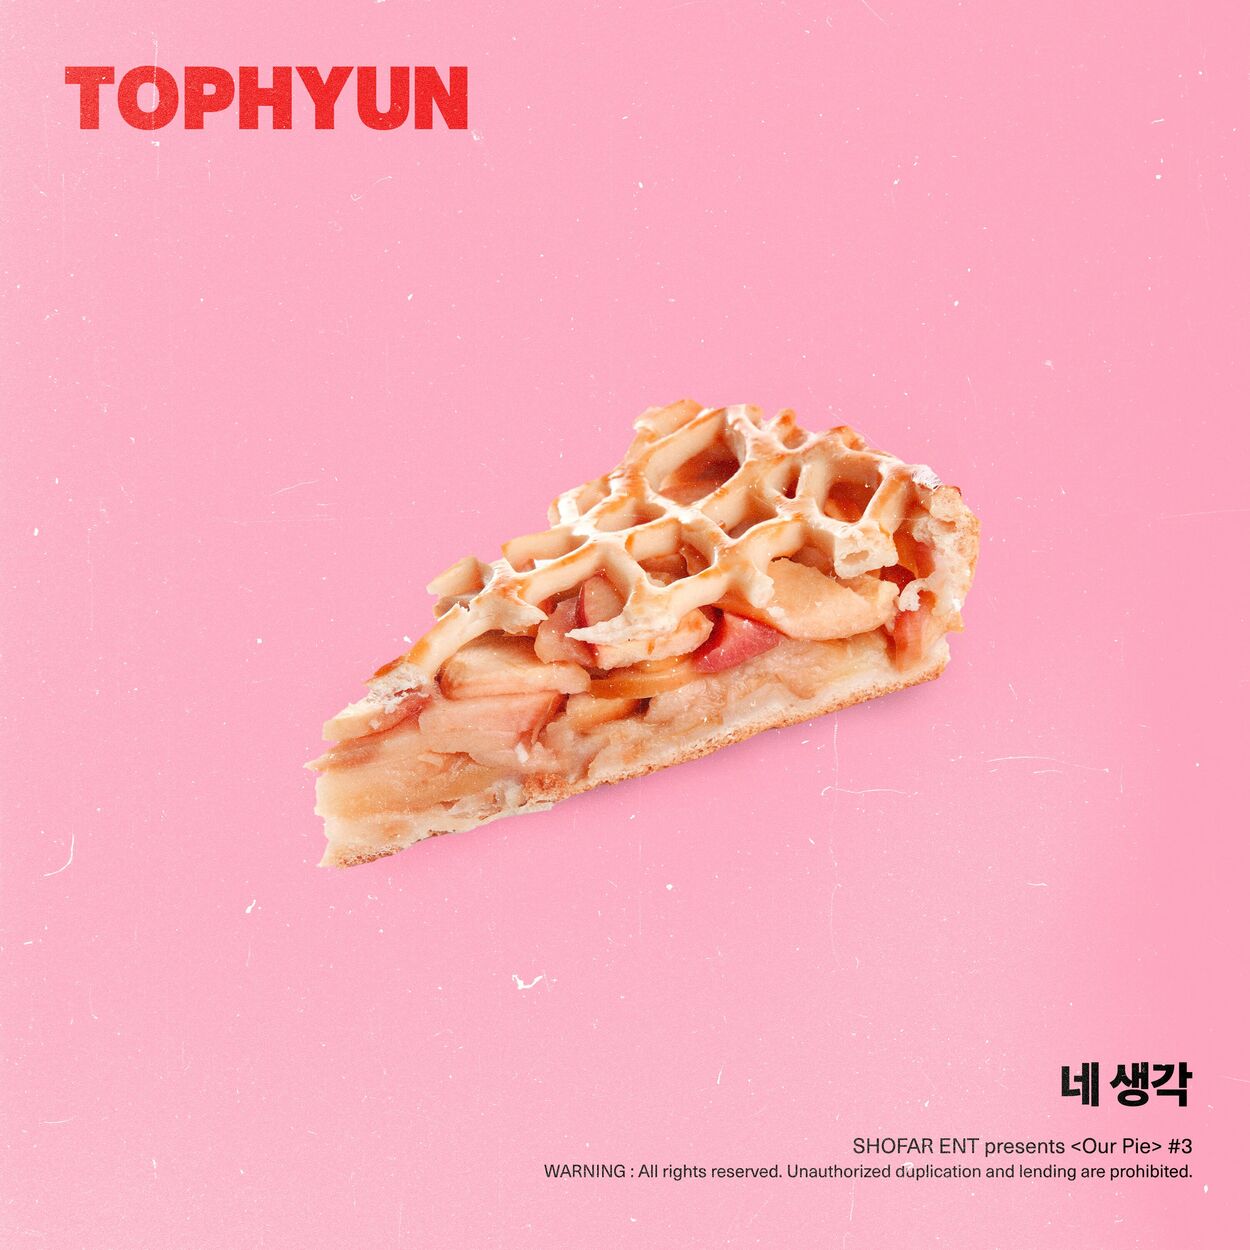 TopHyun – Thinkin’ about you (Our Pie X Tophyun) – Single